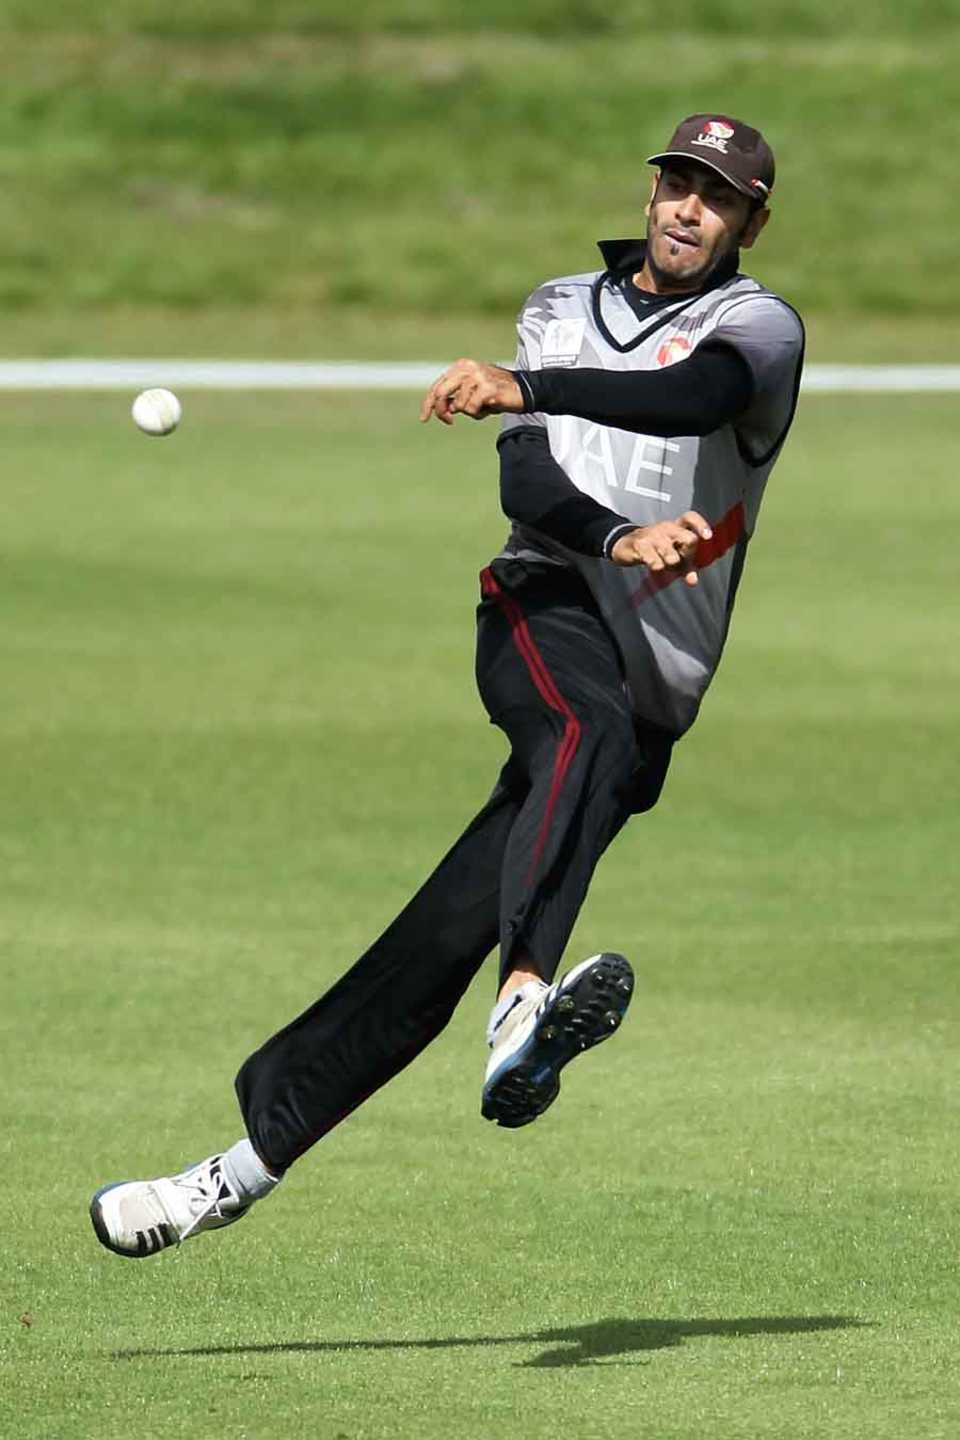 Ahmed Raza throws the ball while fielding